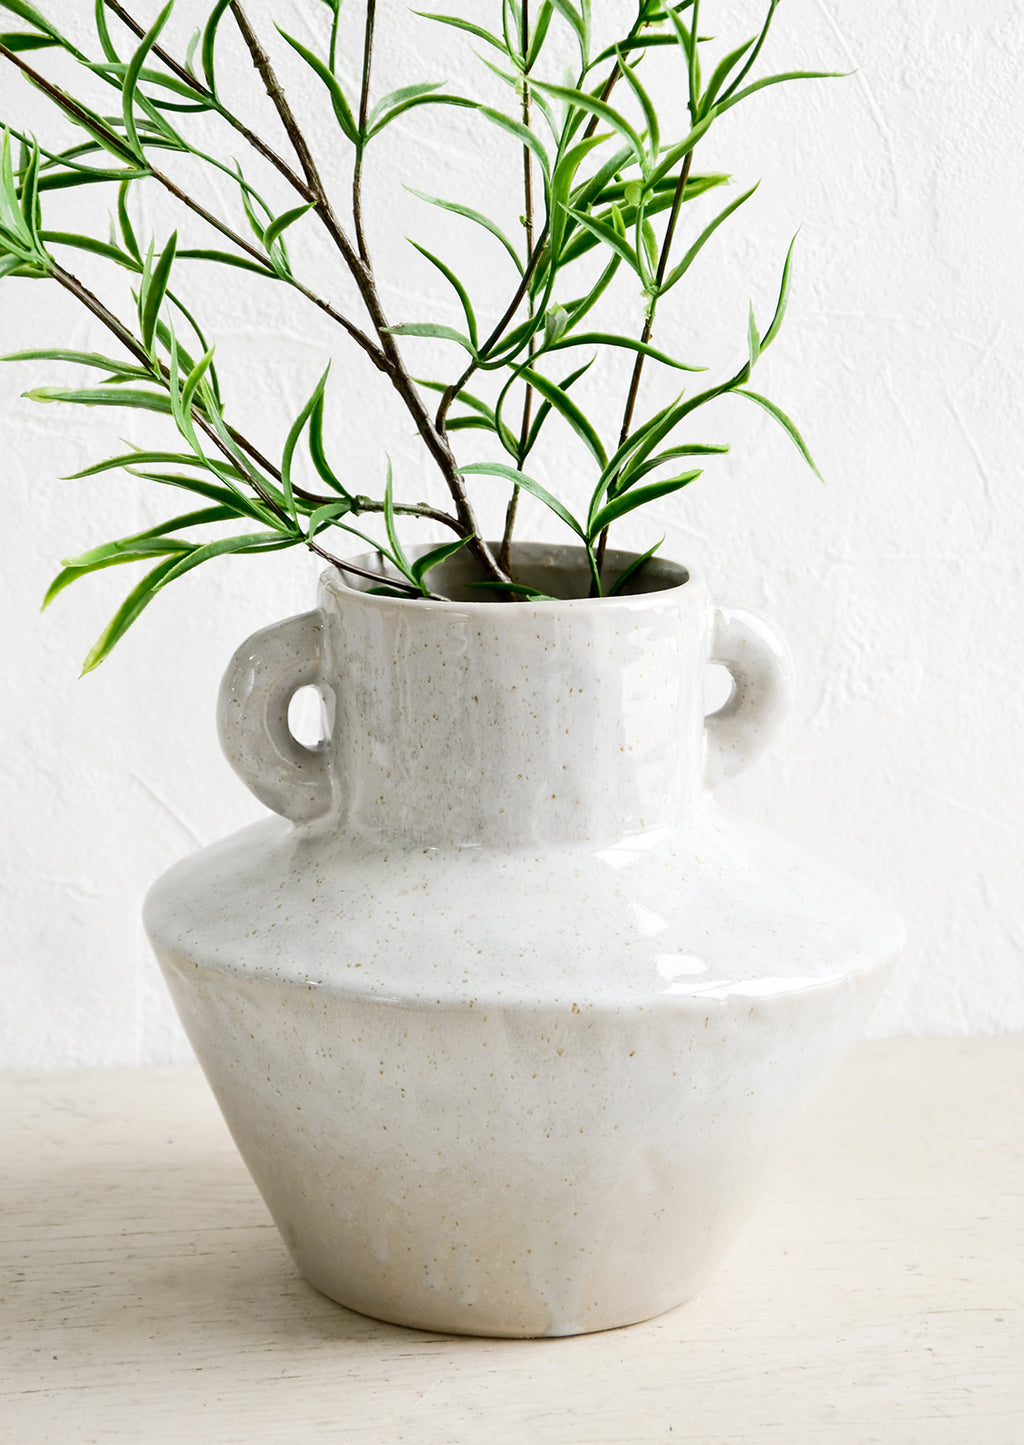 1: Grey ceramic vase in askew silhouette with green leaved branches.